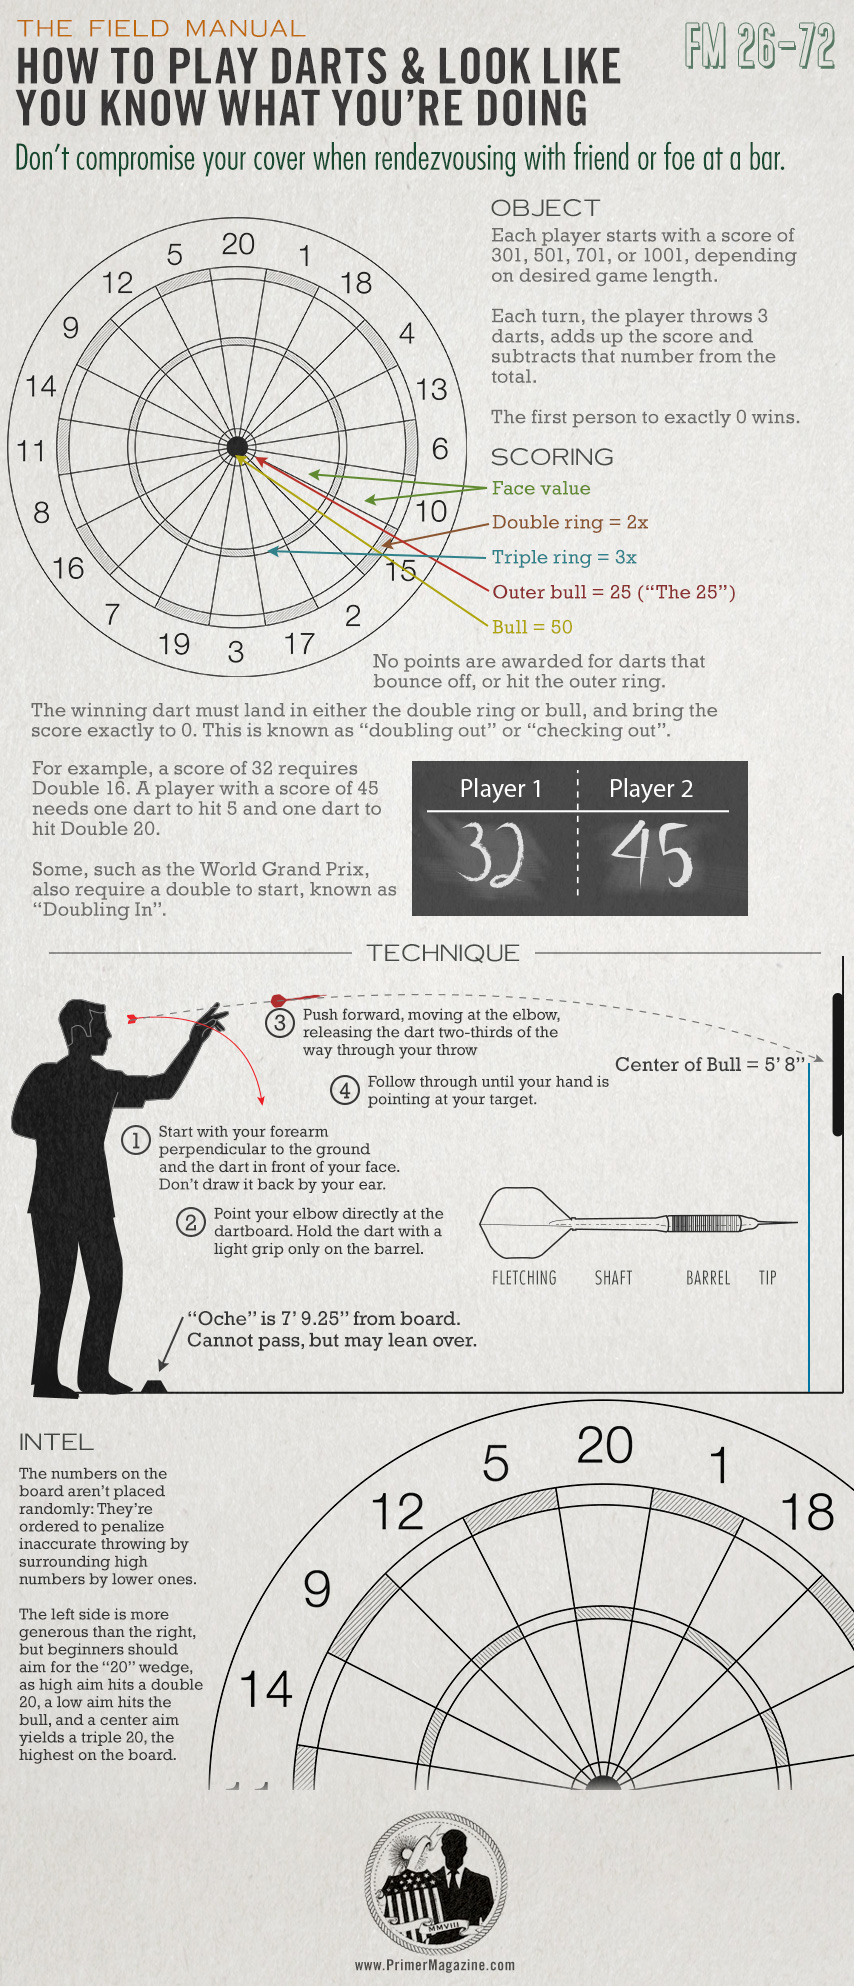 How to play darts